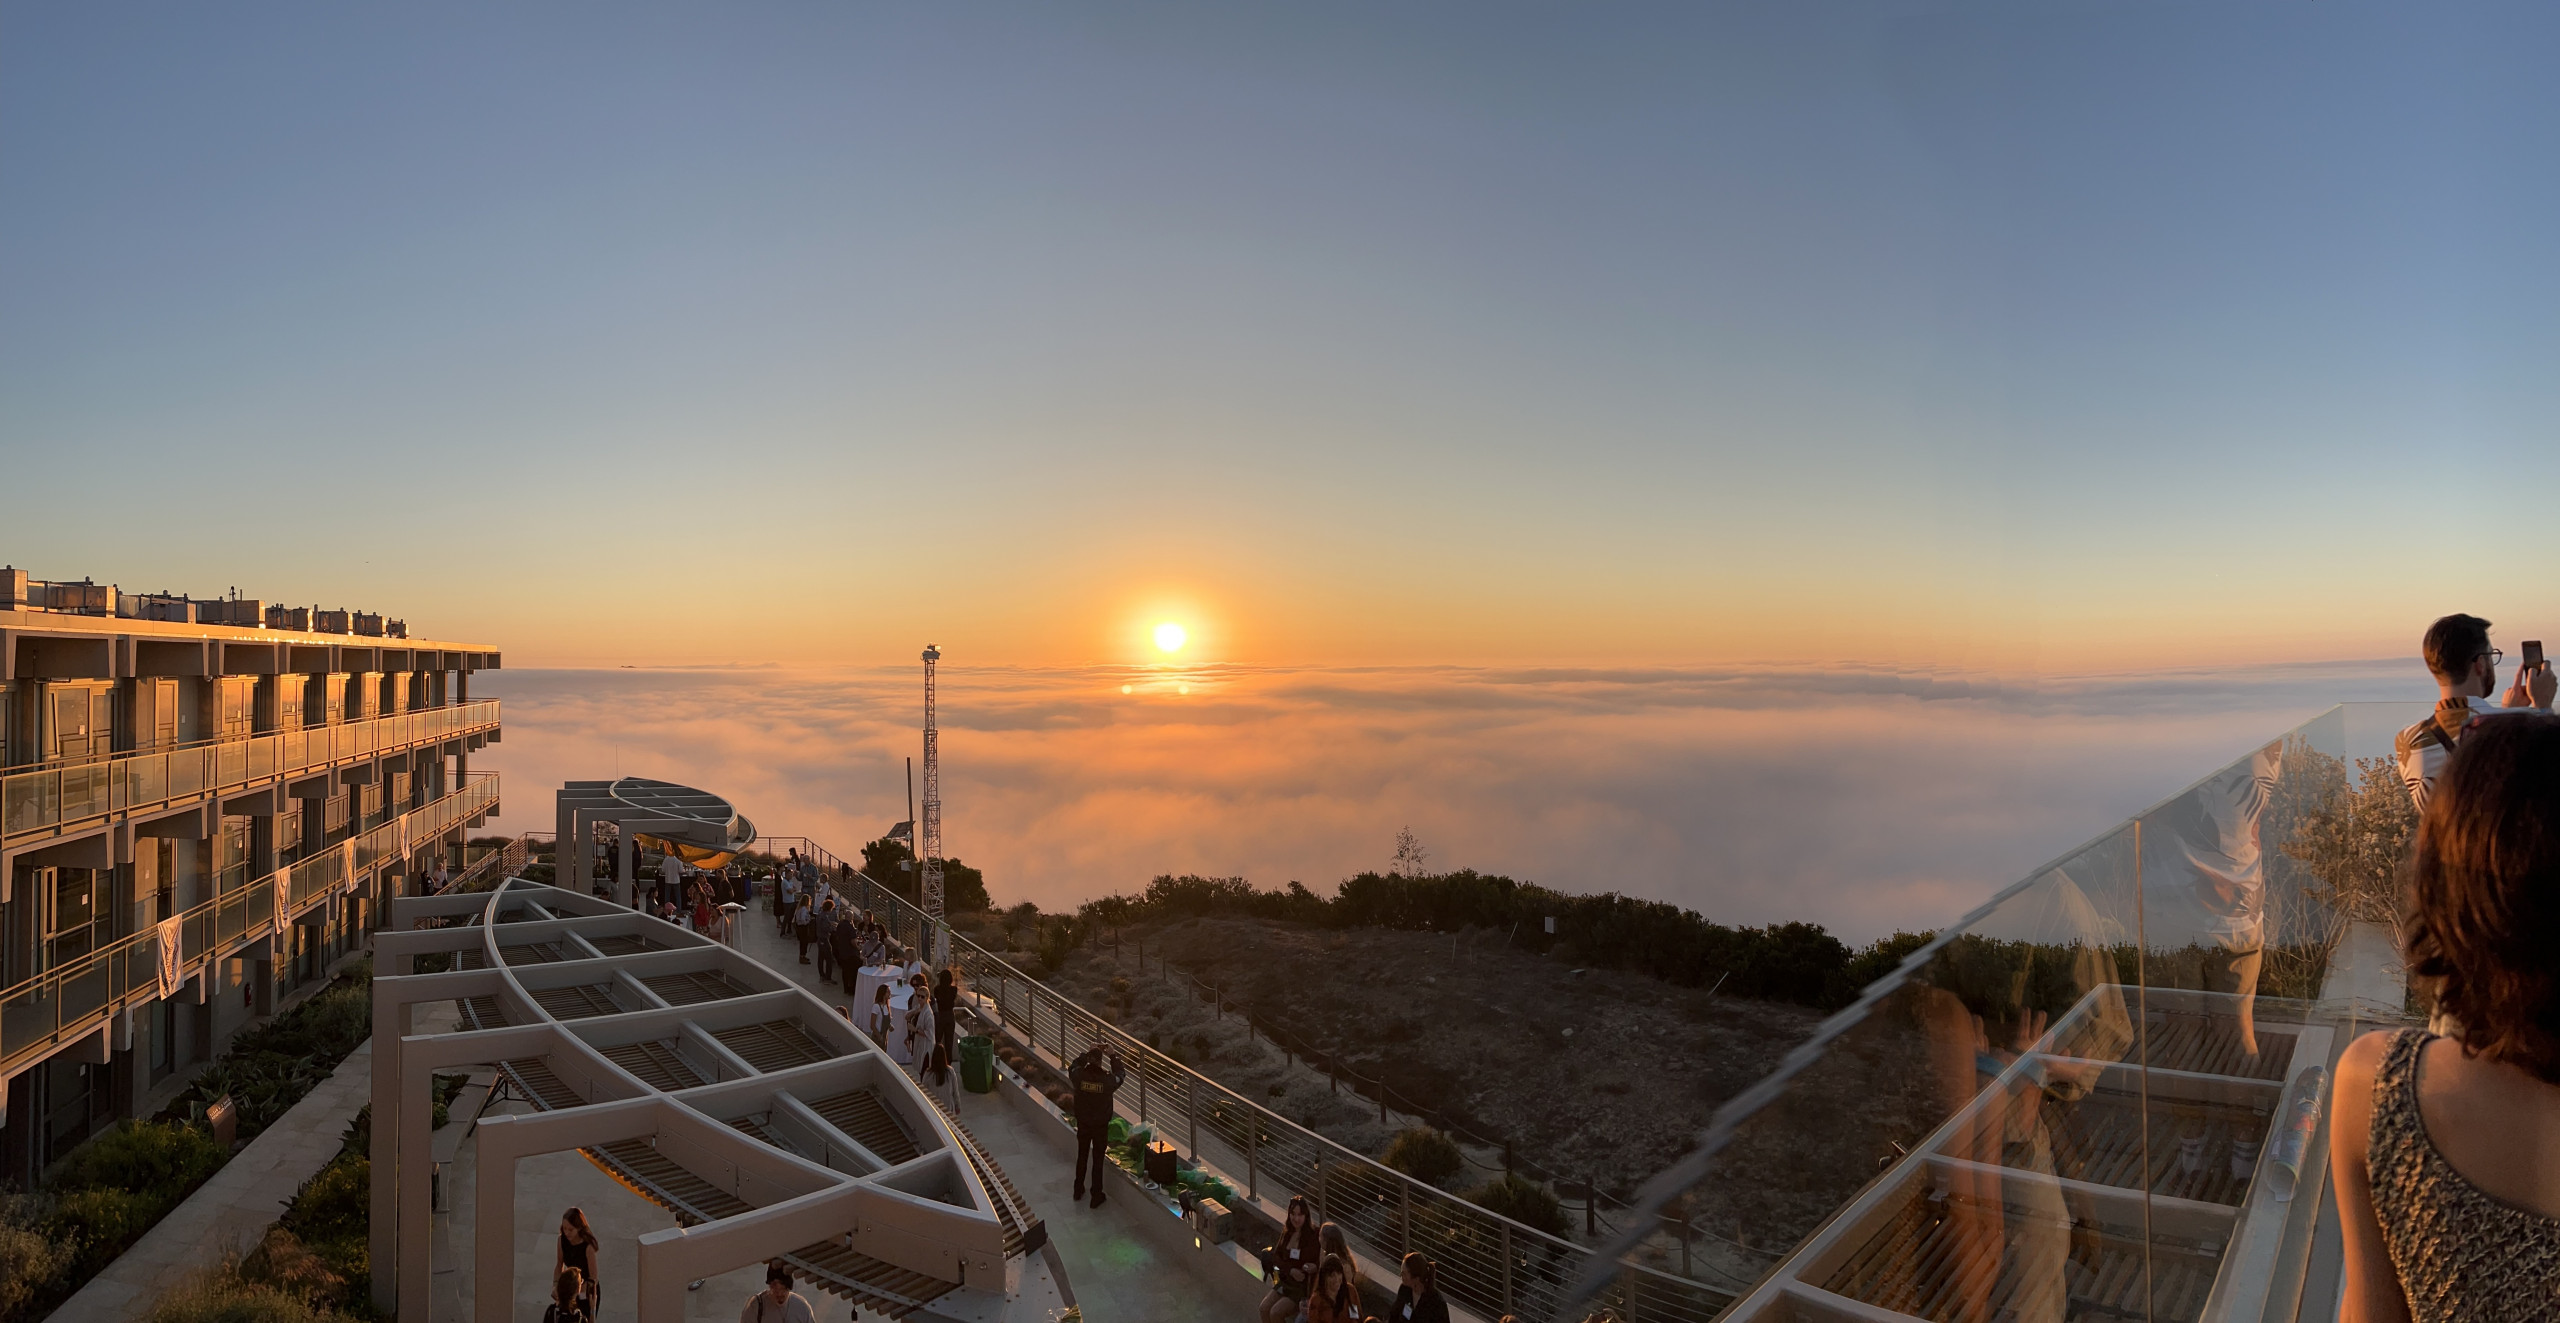                                                                                                                               The sun sets over a blanket of fog, making for an enchanted evening at Scripps Oceanography. Photo: Marcus Twilegar